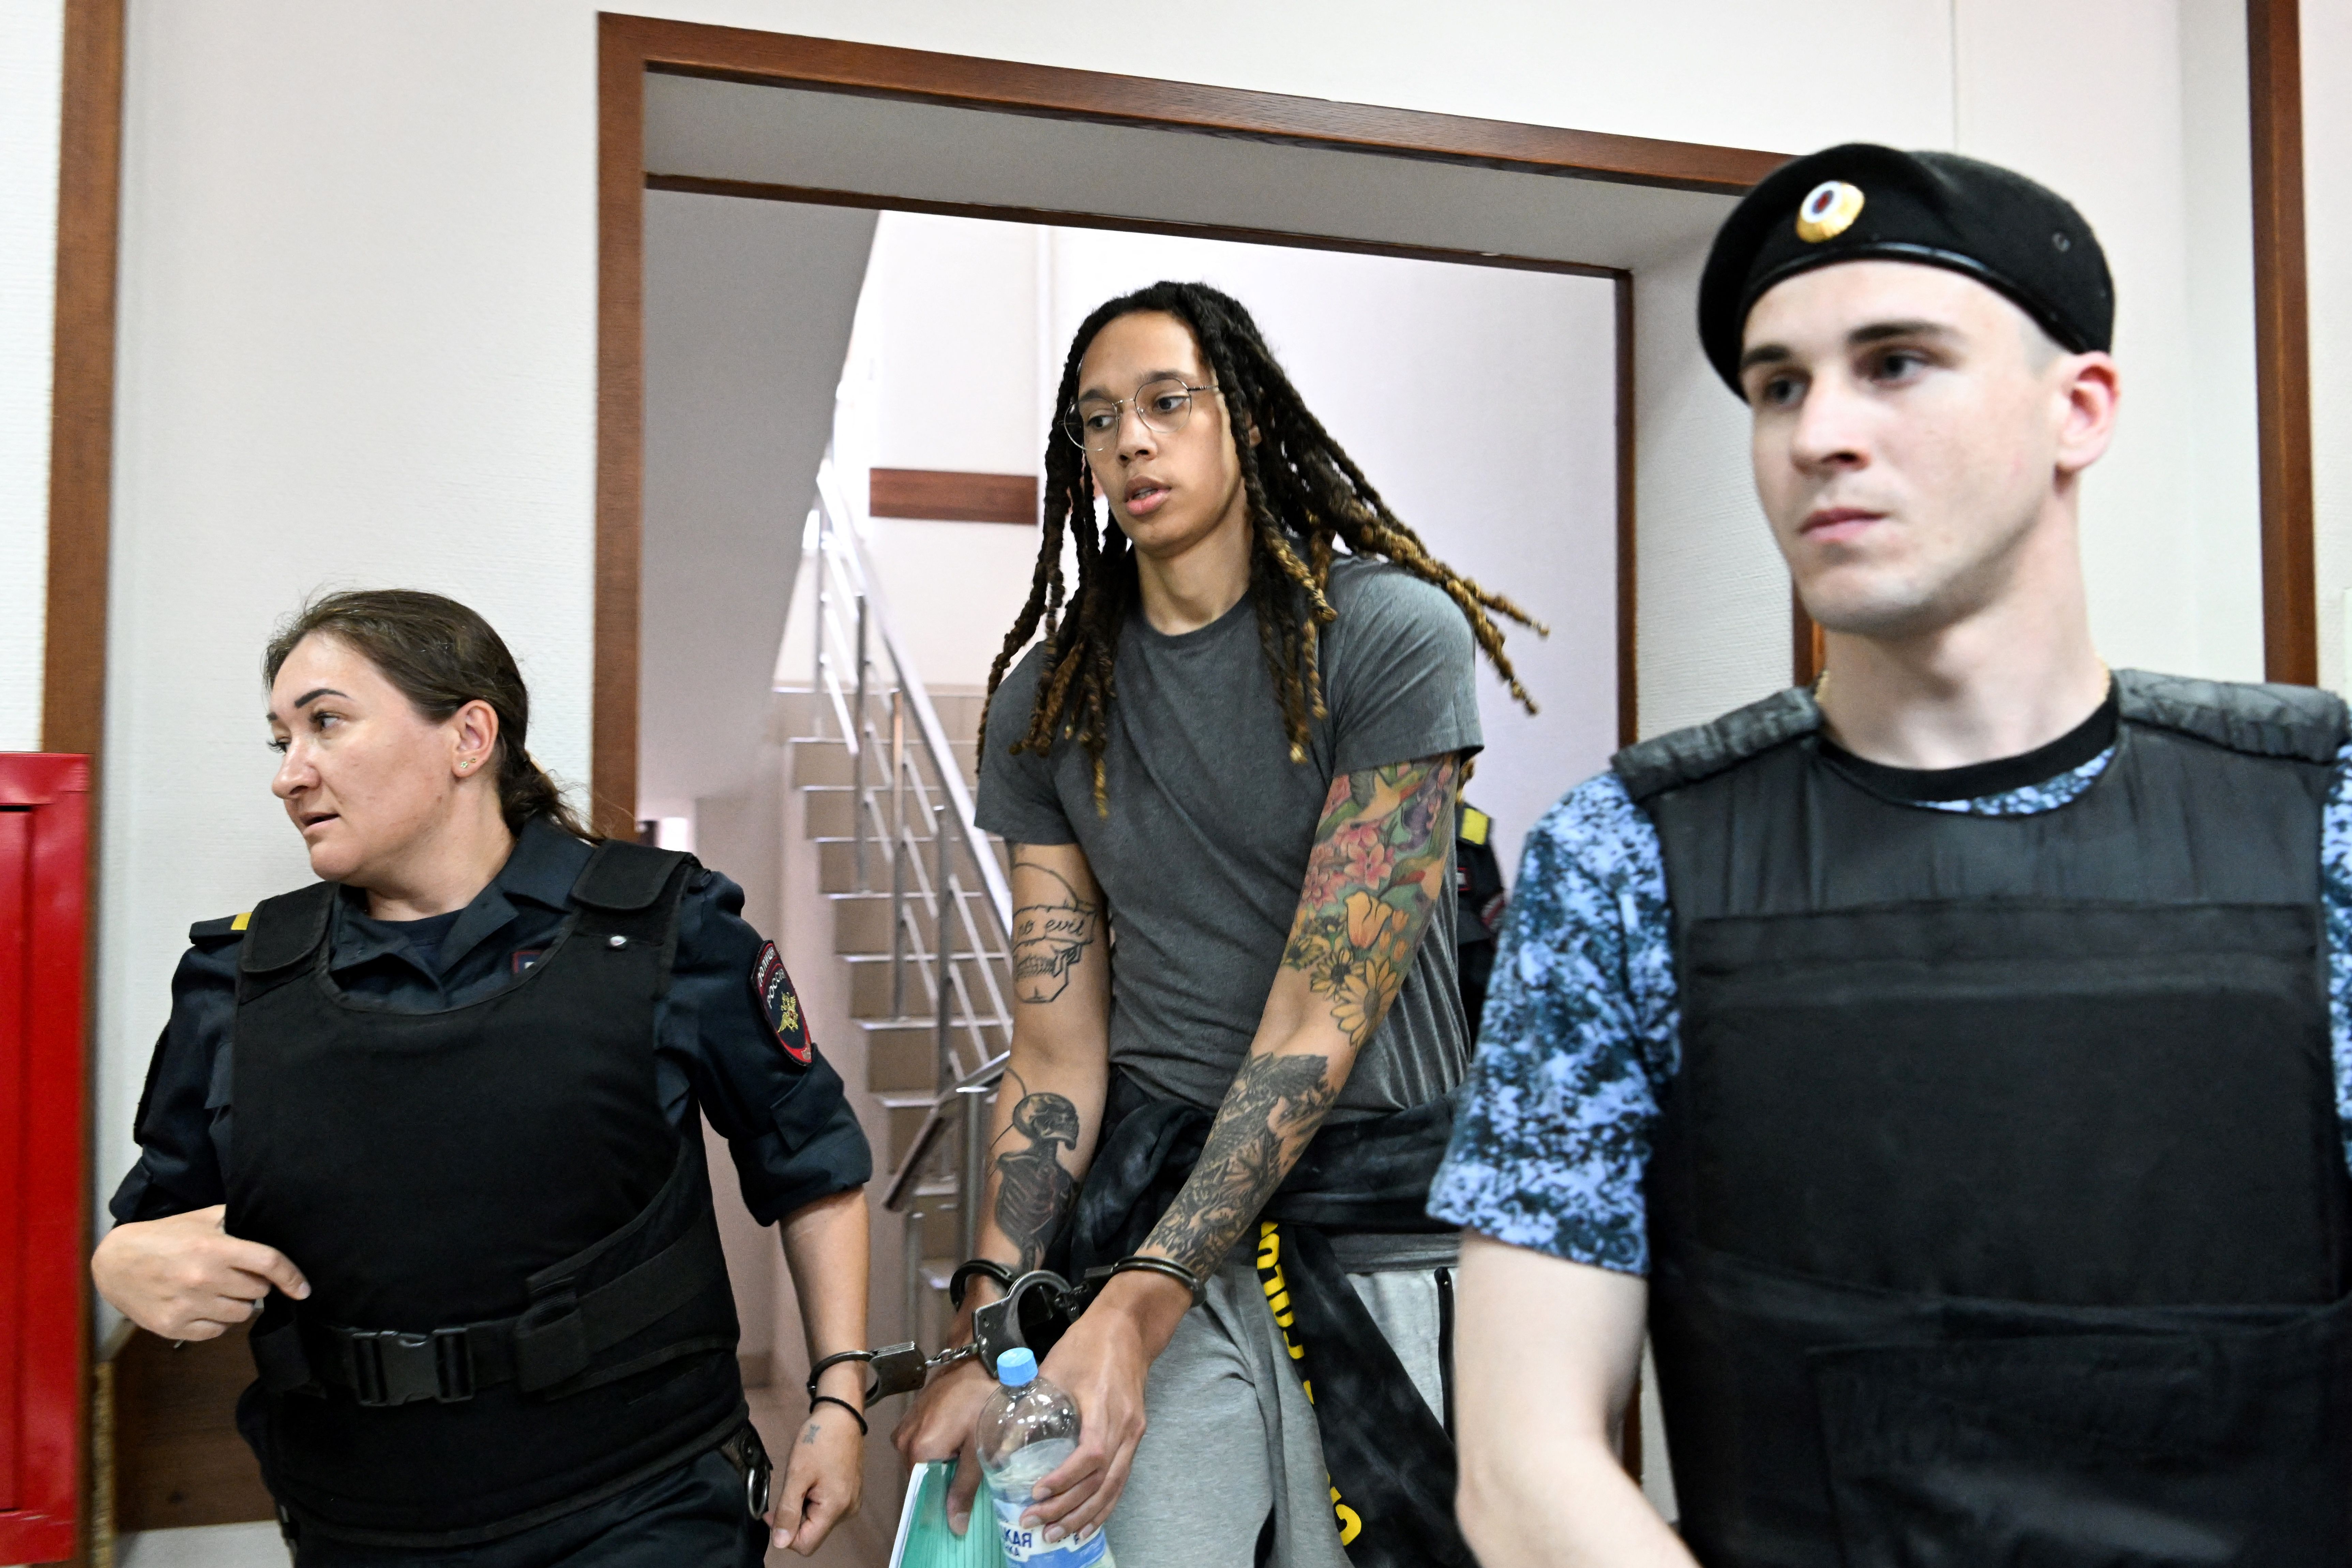 Brittney Griner S Trial Set For July 1 In Russia Wnba Star Facing 10 Years In Prison Bleacher Report Latest News Videos And Highlights